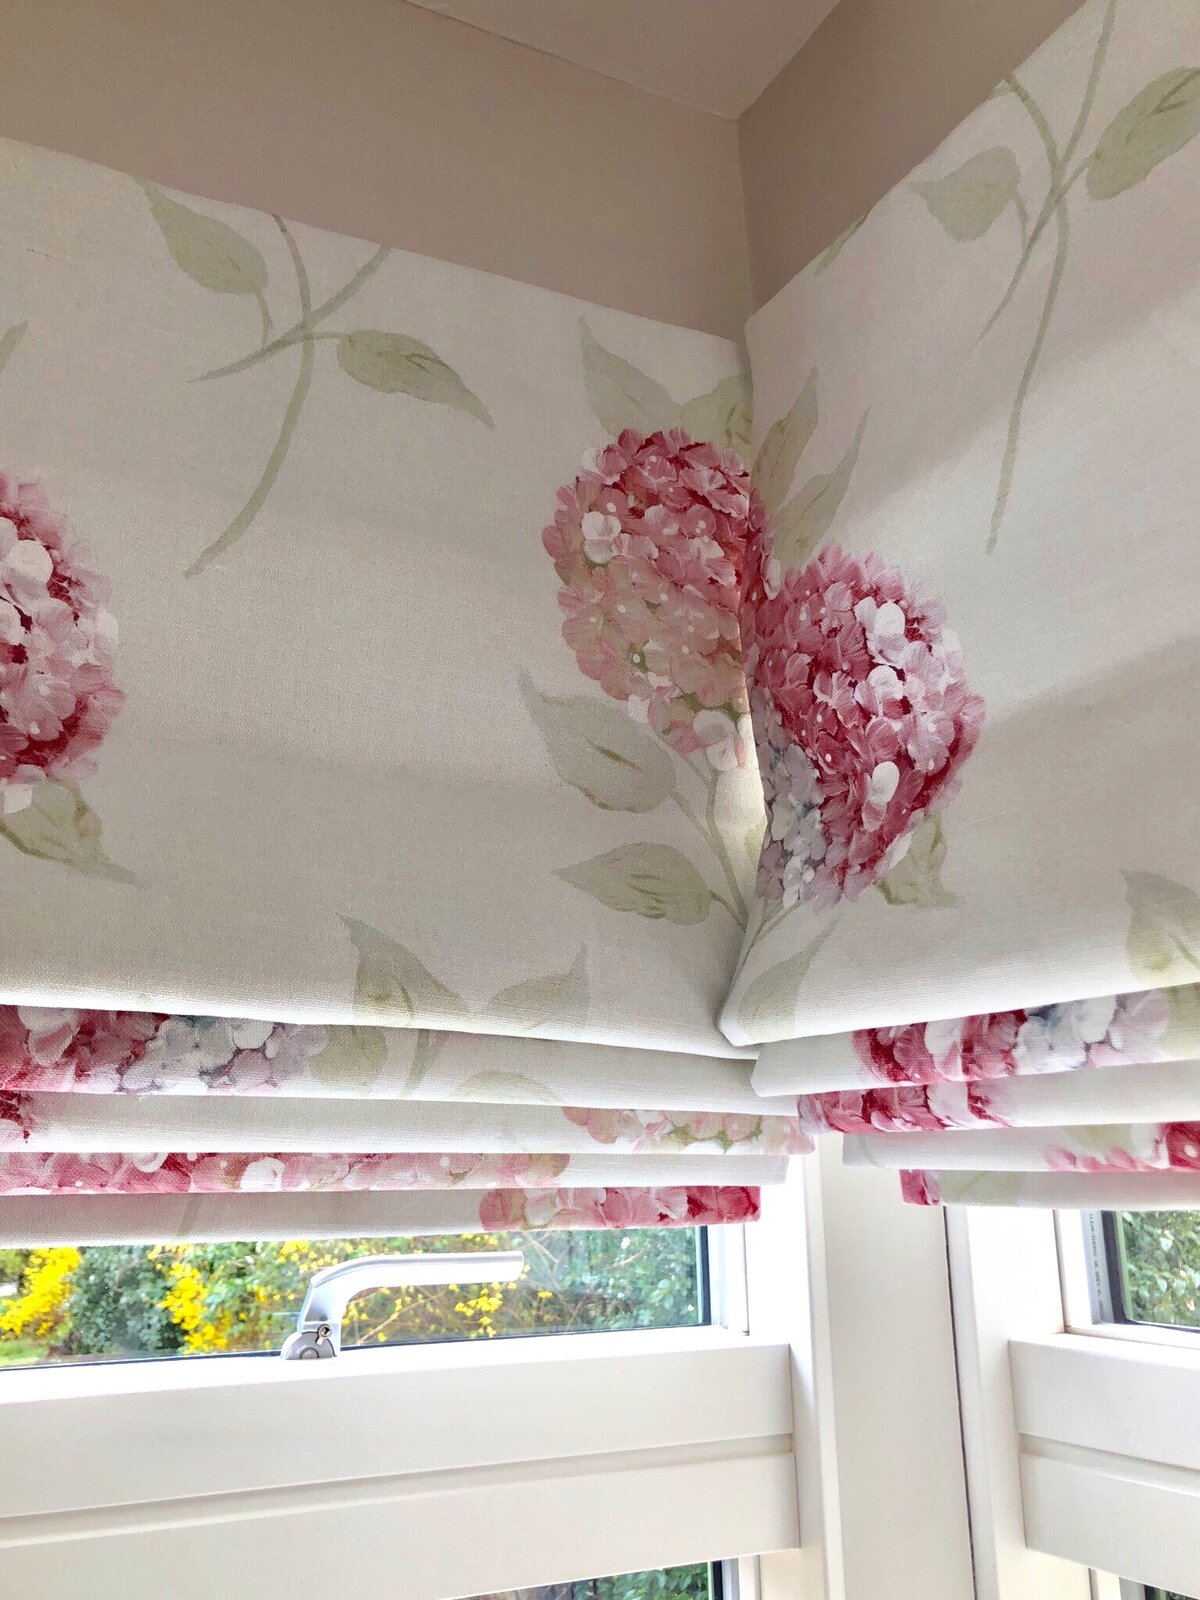 Made to measure curtains & blijds Oxfordshire55